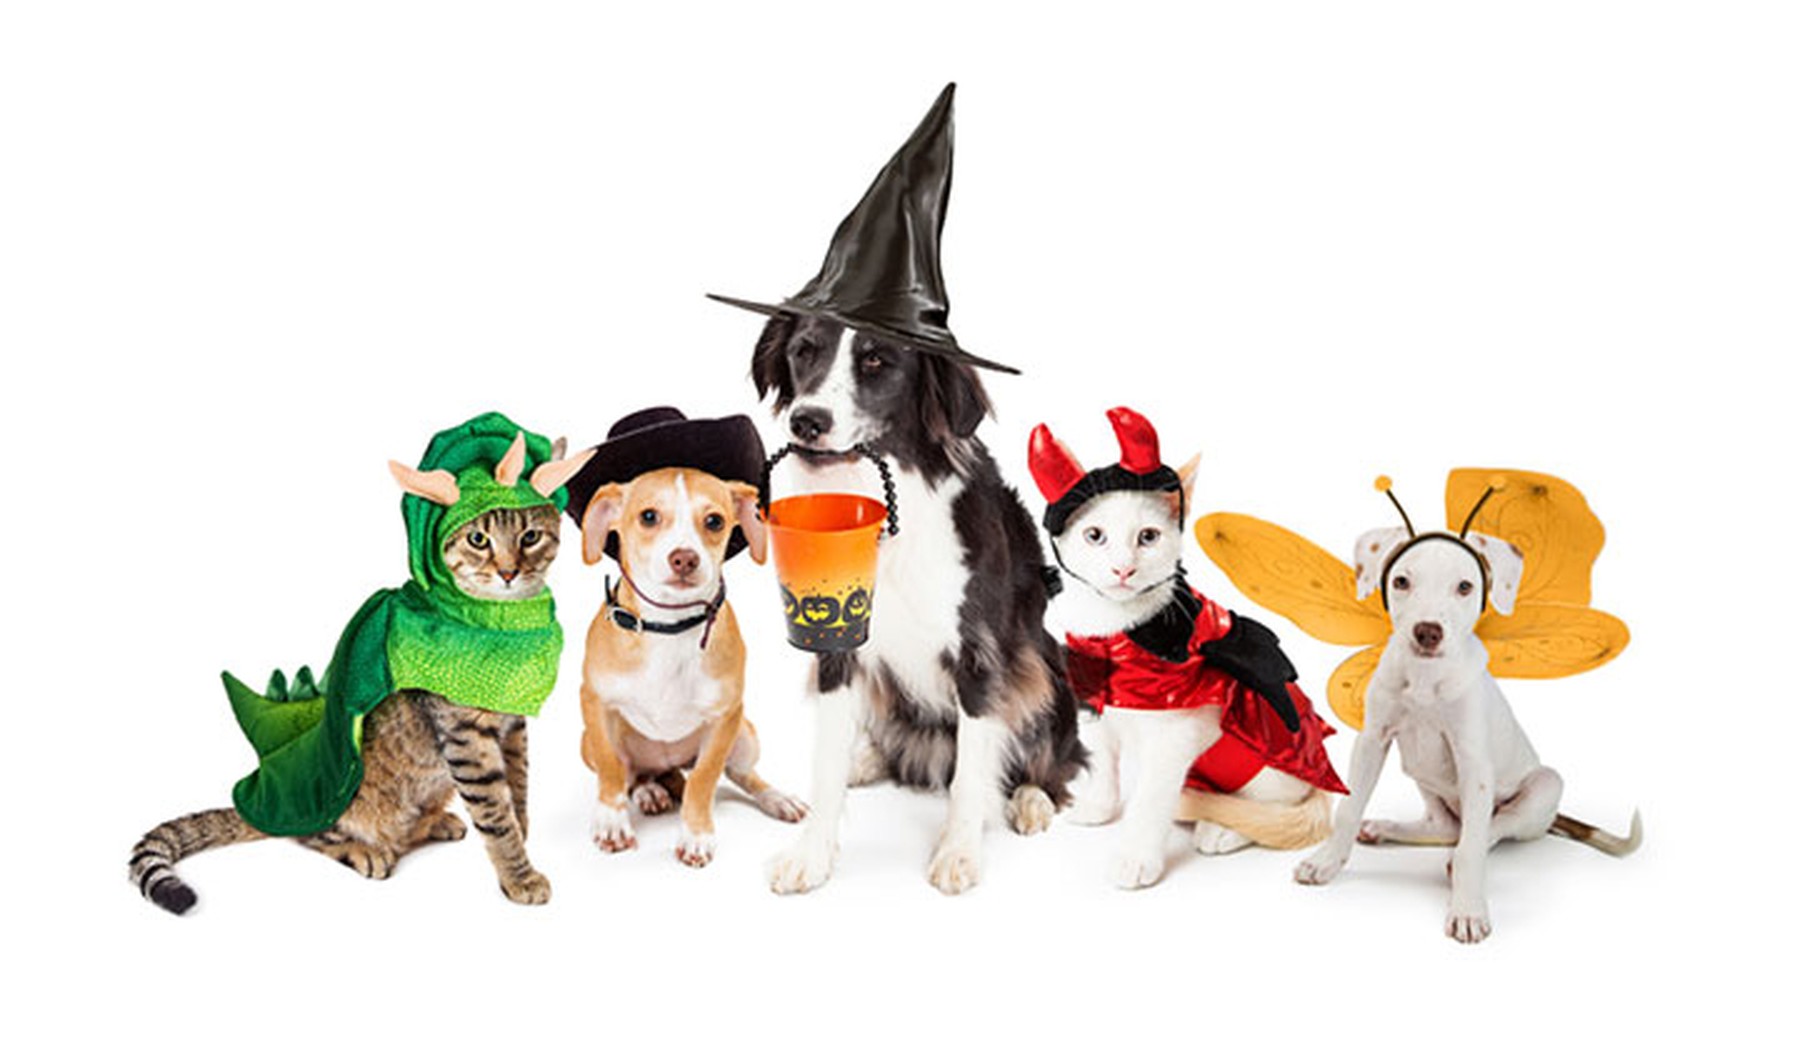 Dogs and cats in Halloween costumes